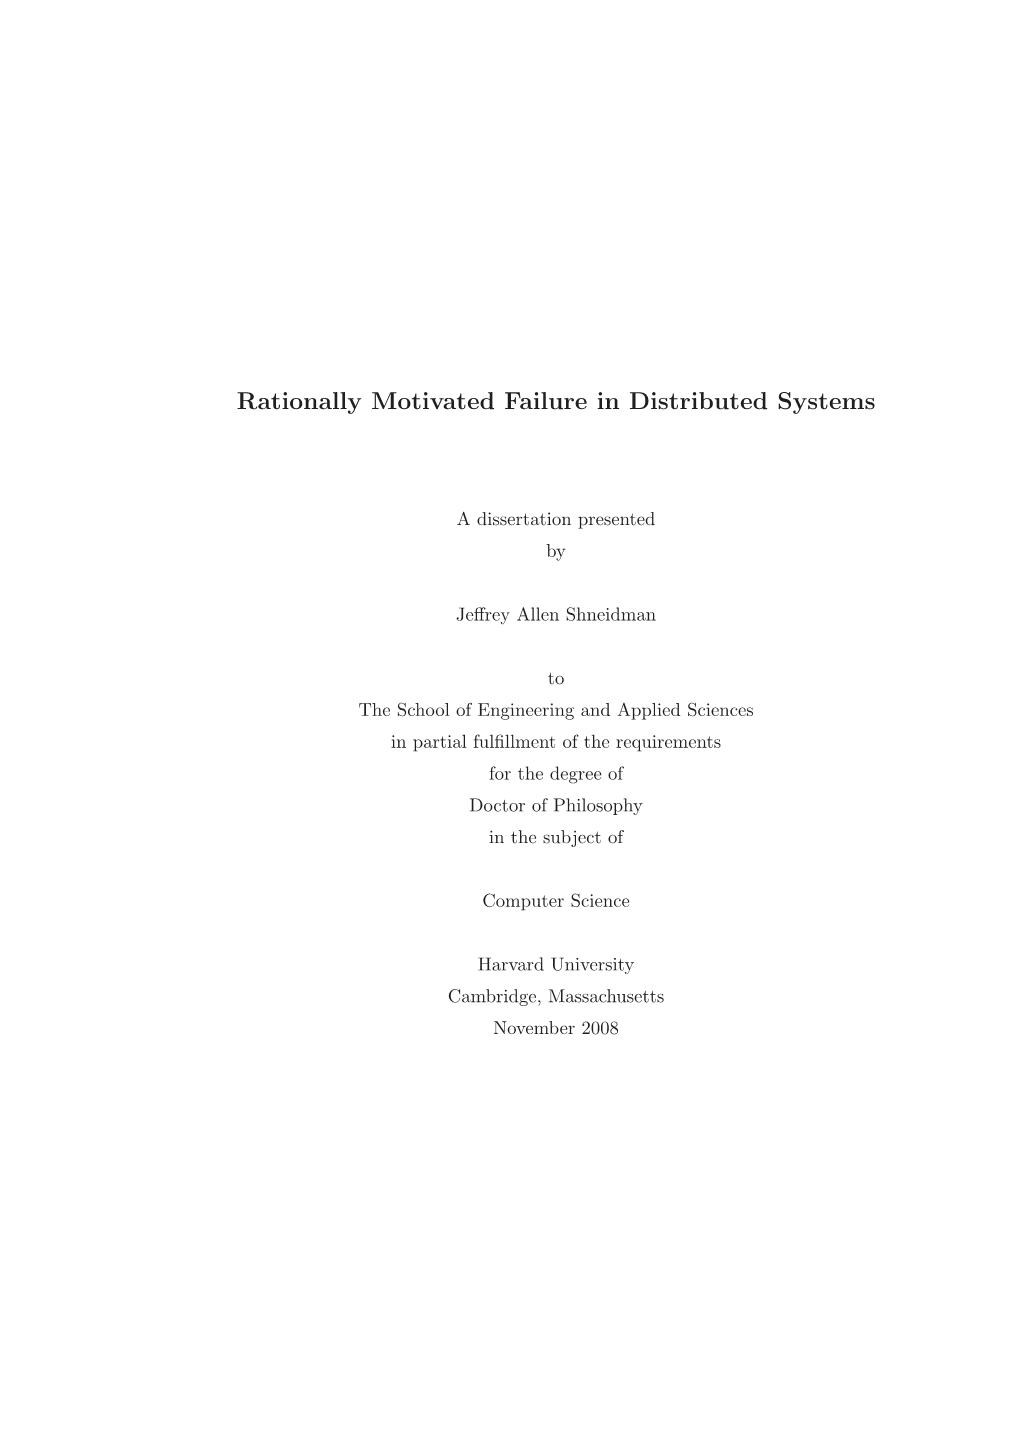 Rationally Motivated Failure in Distributed Systems